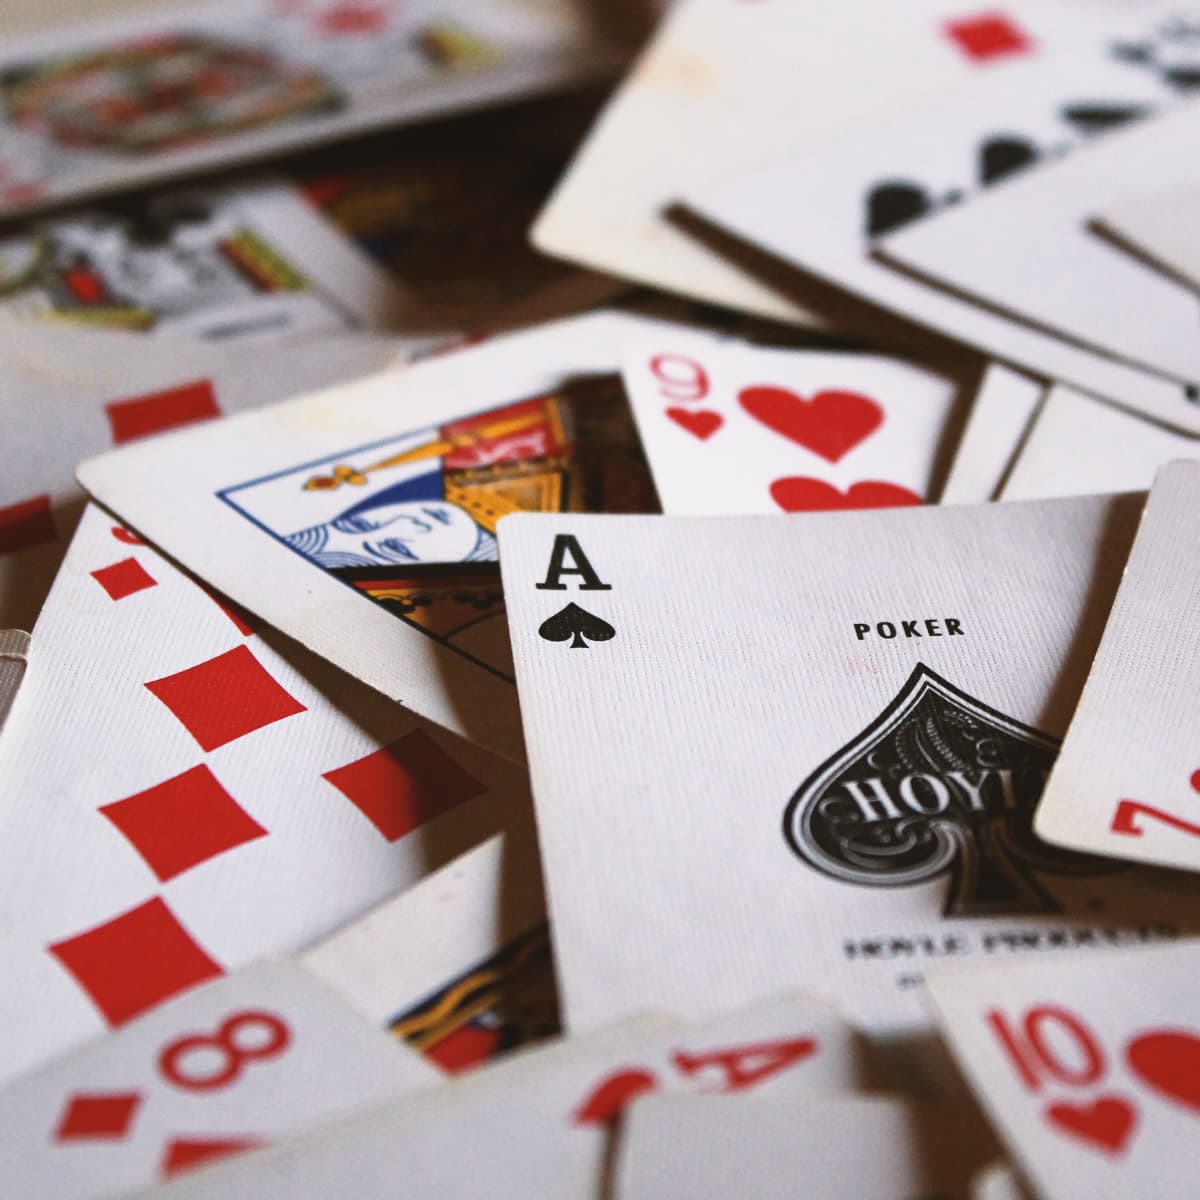 How to Play Easy 7-Card Rummy for Beginners (And Some Variations) -  HobbyLark